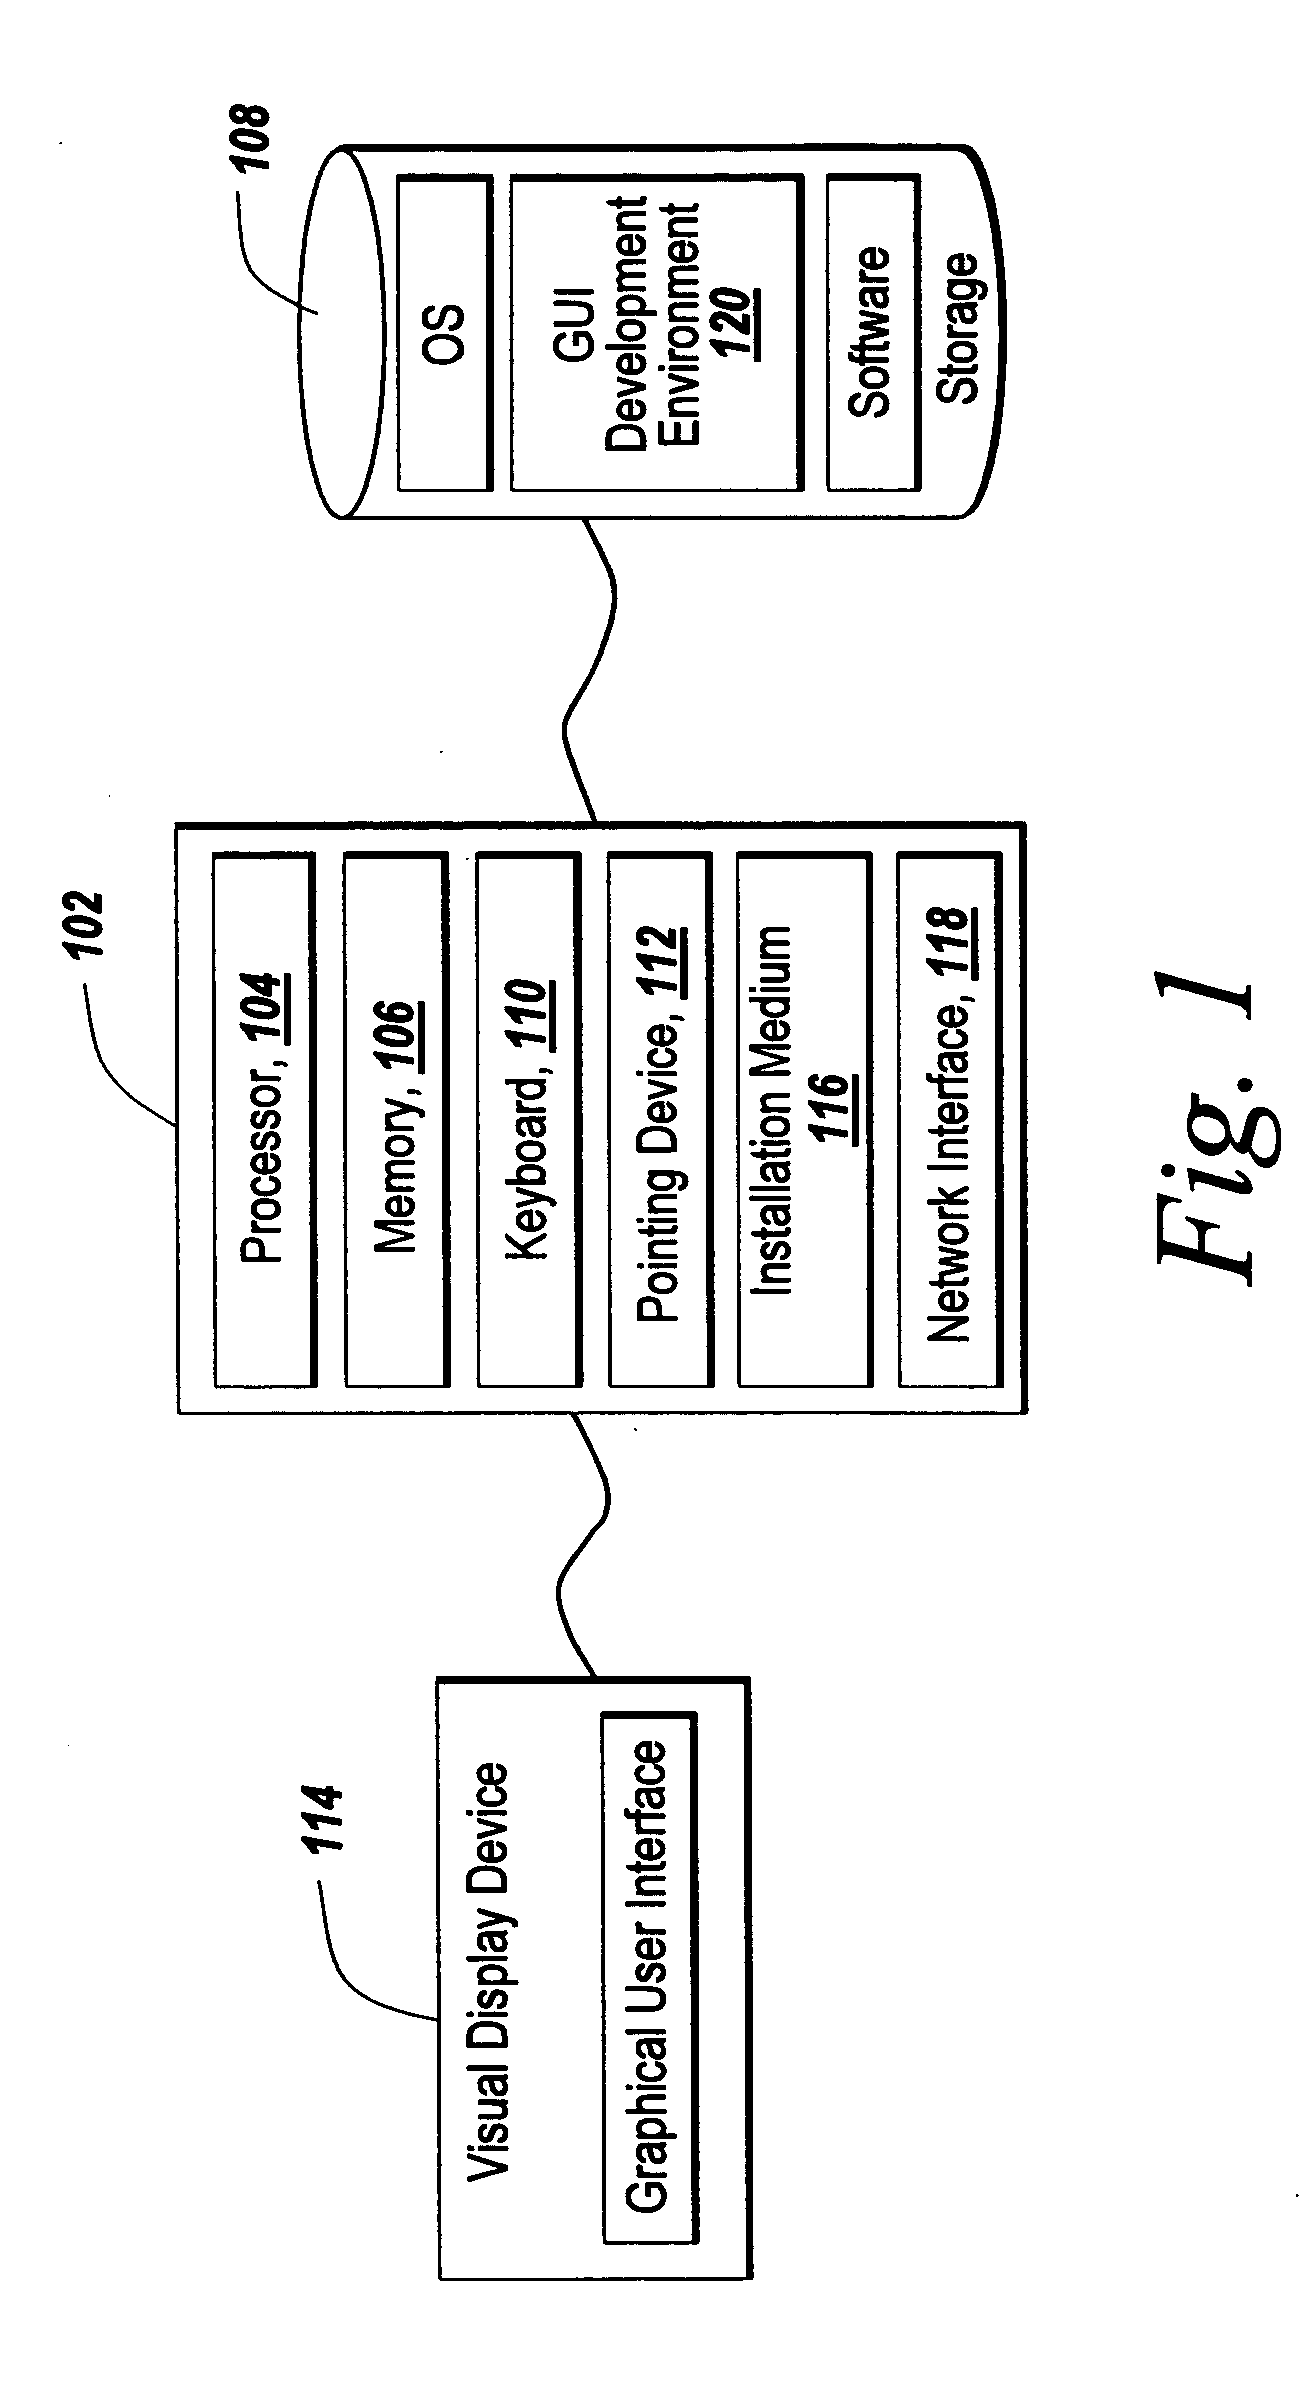 Graphical state machine based programming for a graphical user interface